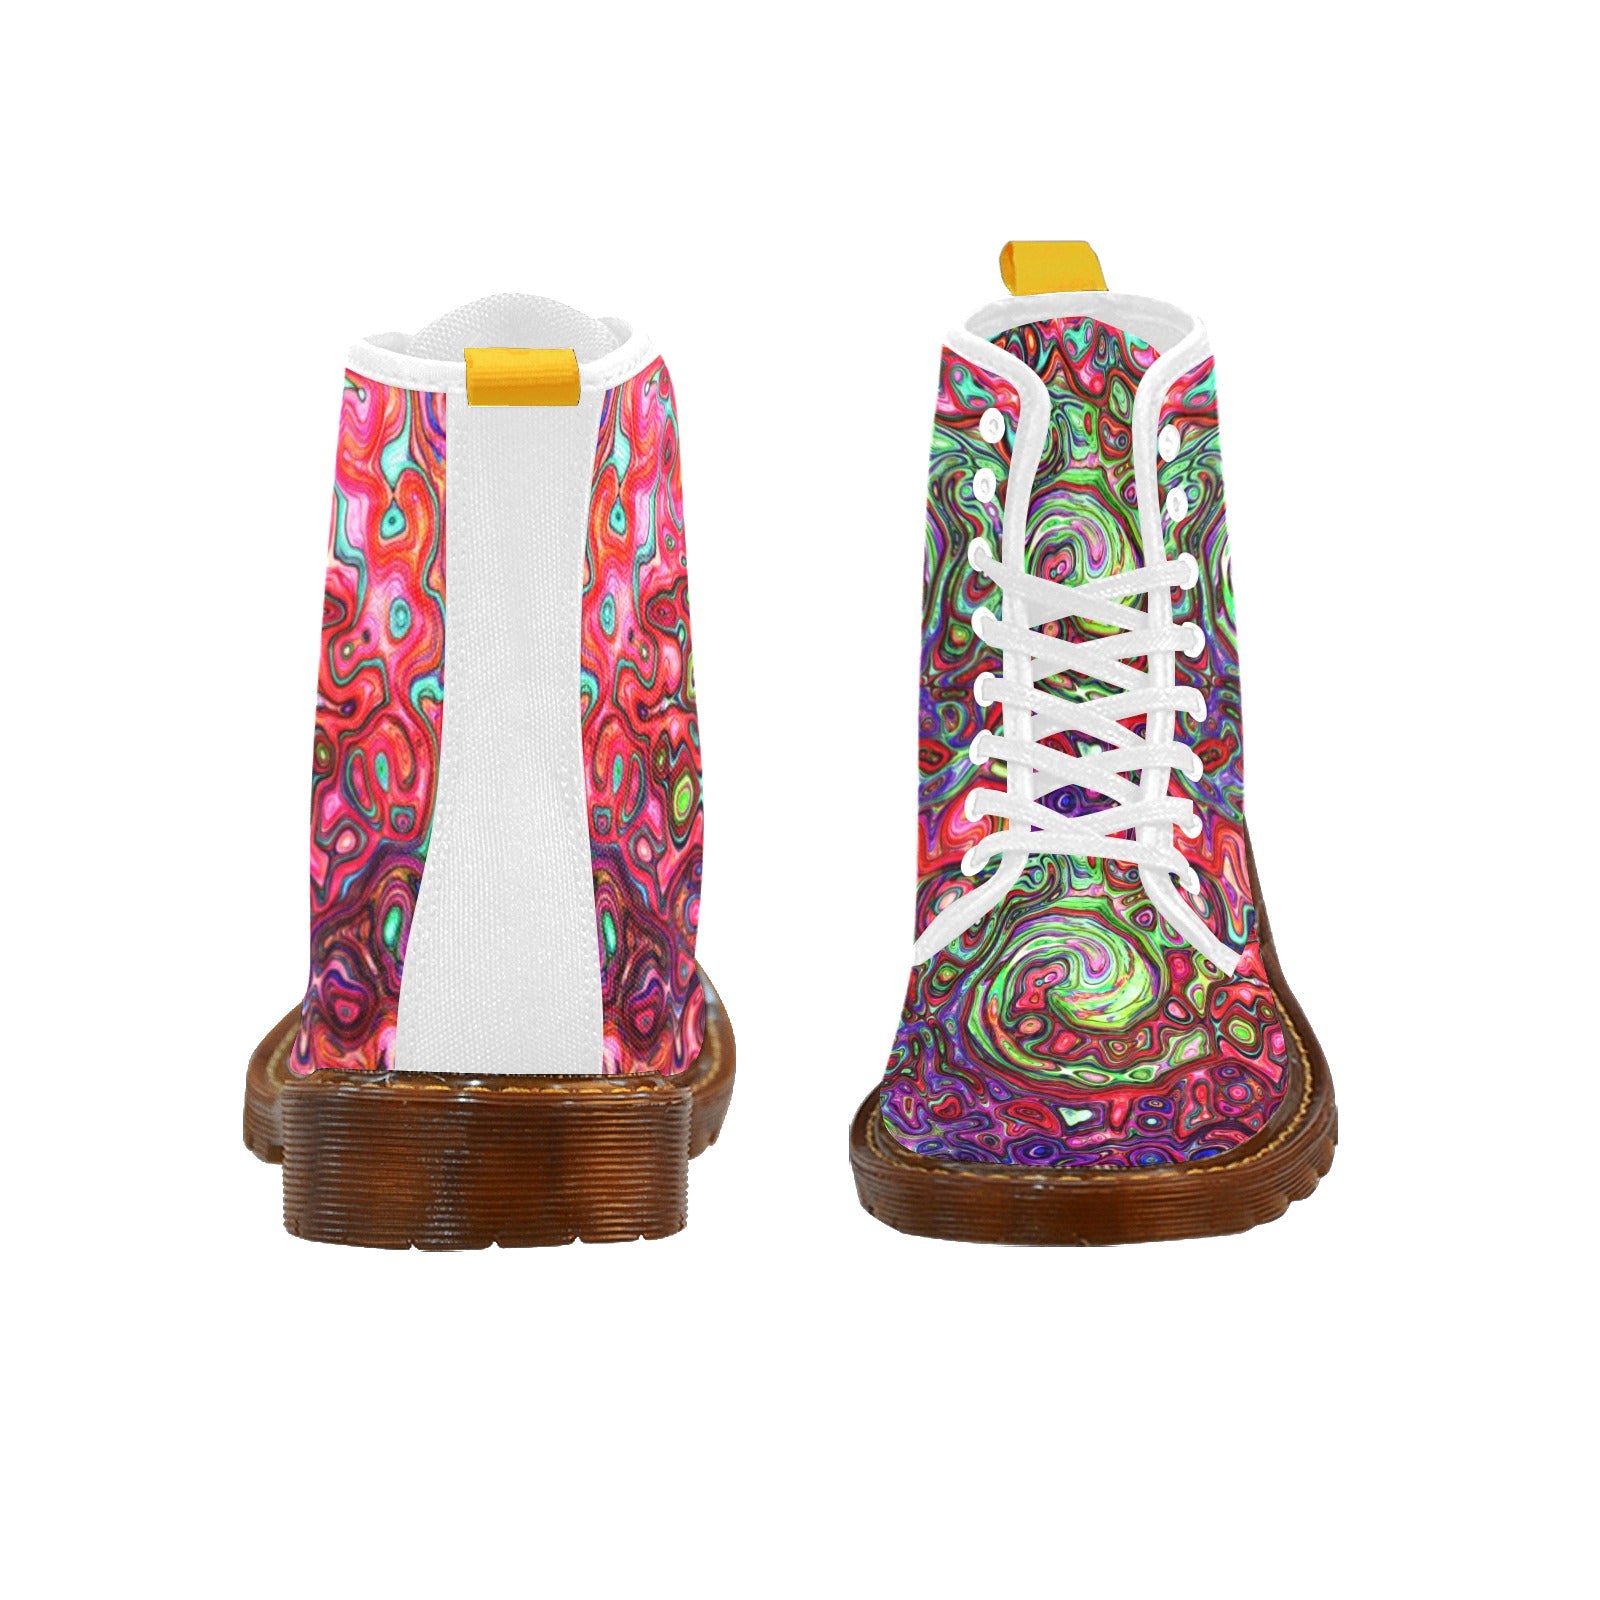 Boots for Women, Watercolor Red Groovy Abstract Retro Liquid Swirl - White